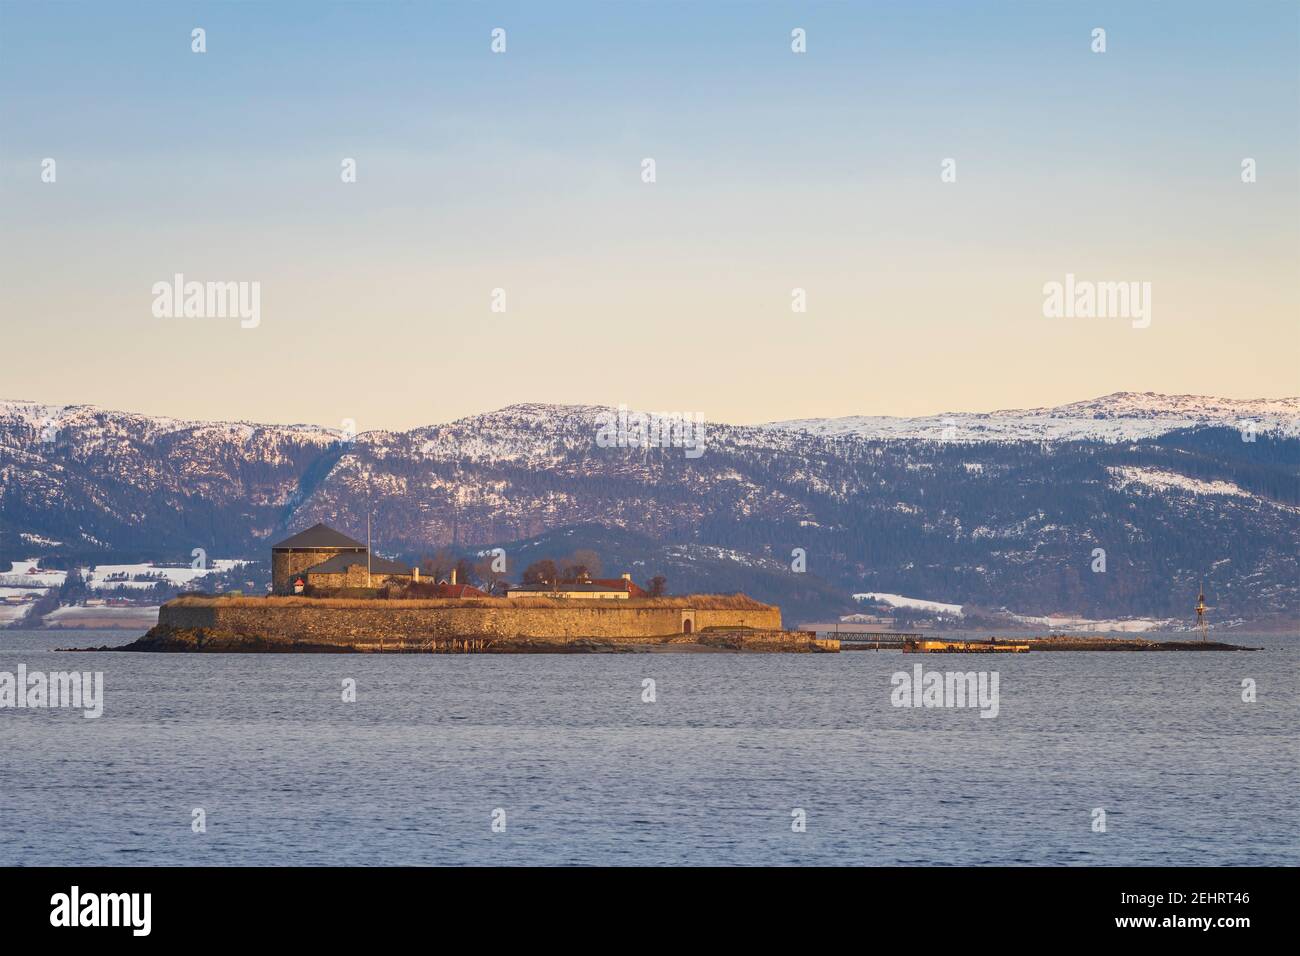 The island of Munkholmen, that sits in the fjord waters outside Trondheim, Norway. Stock Photo